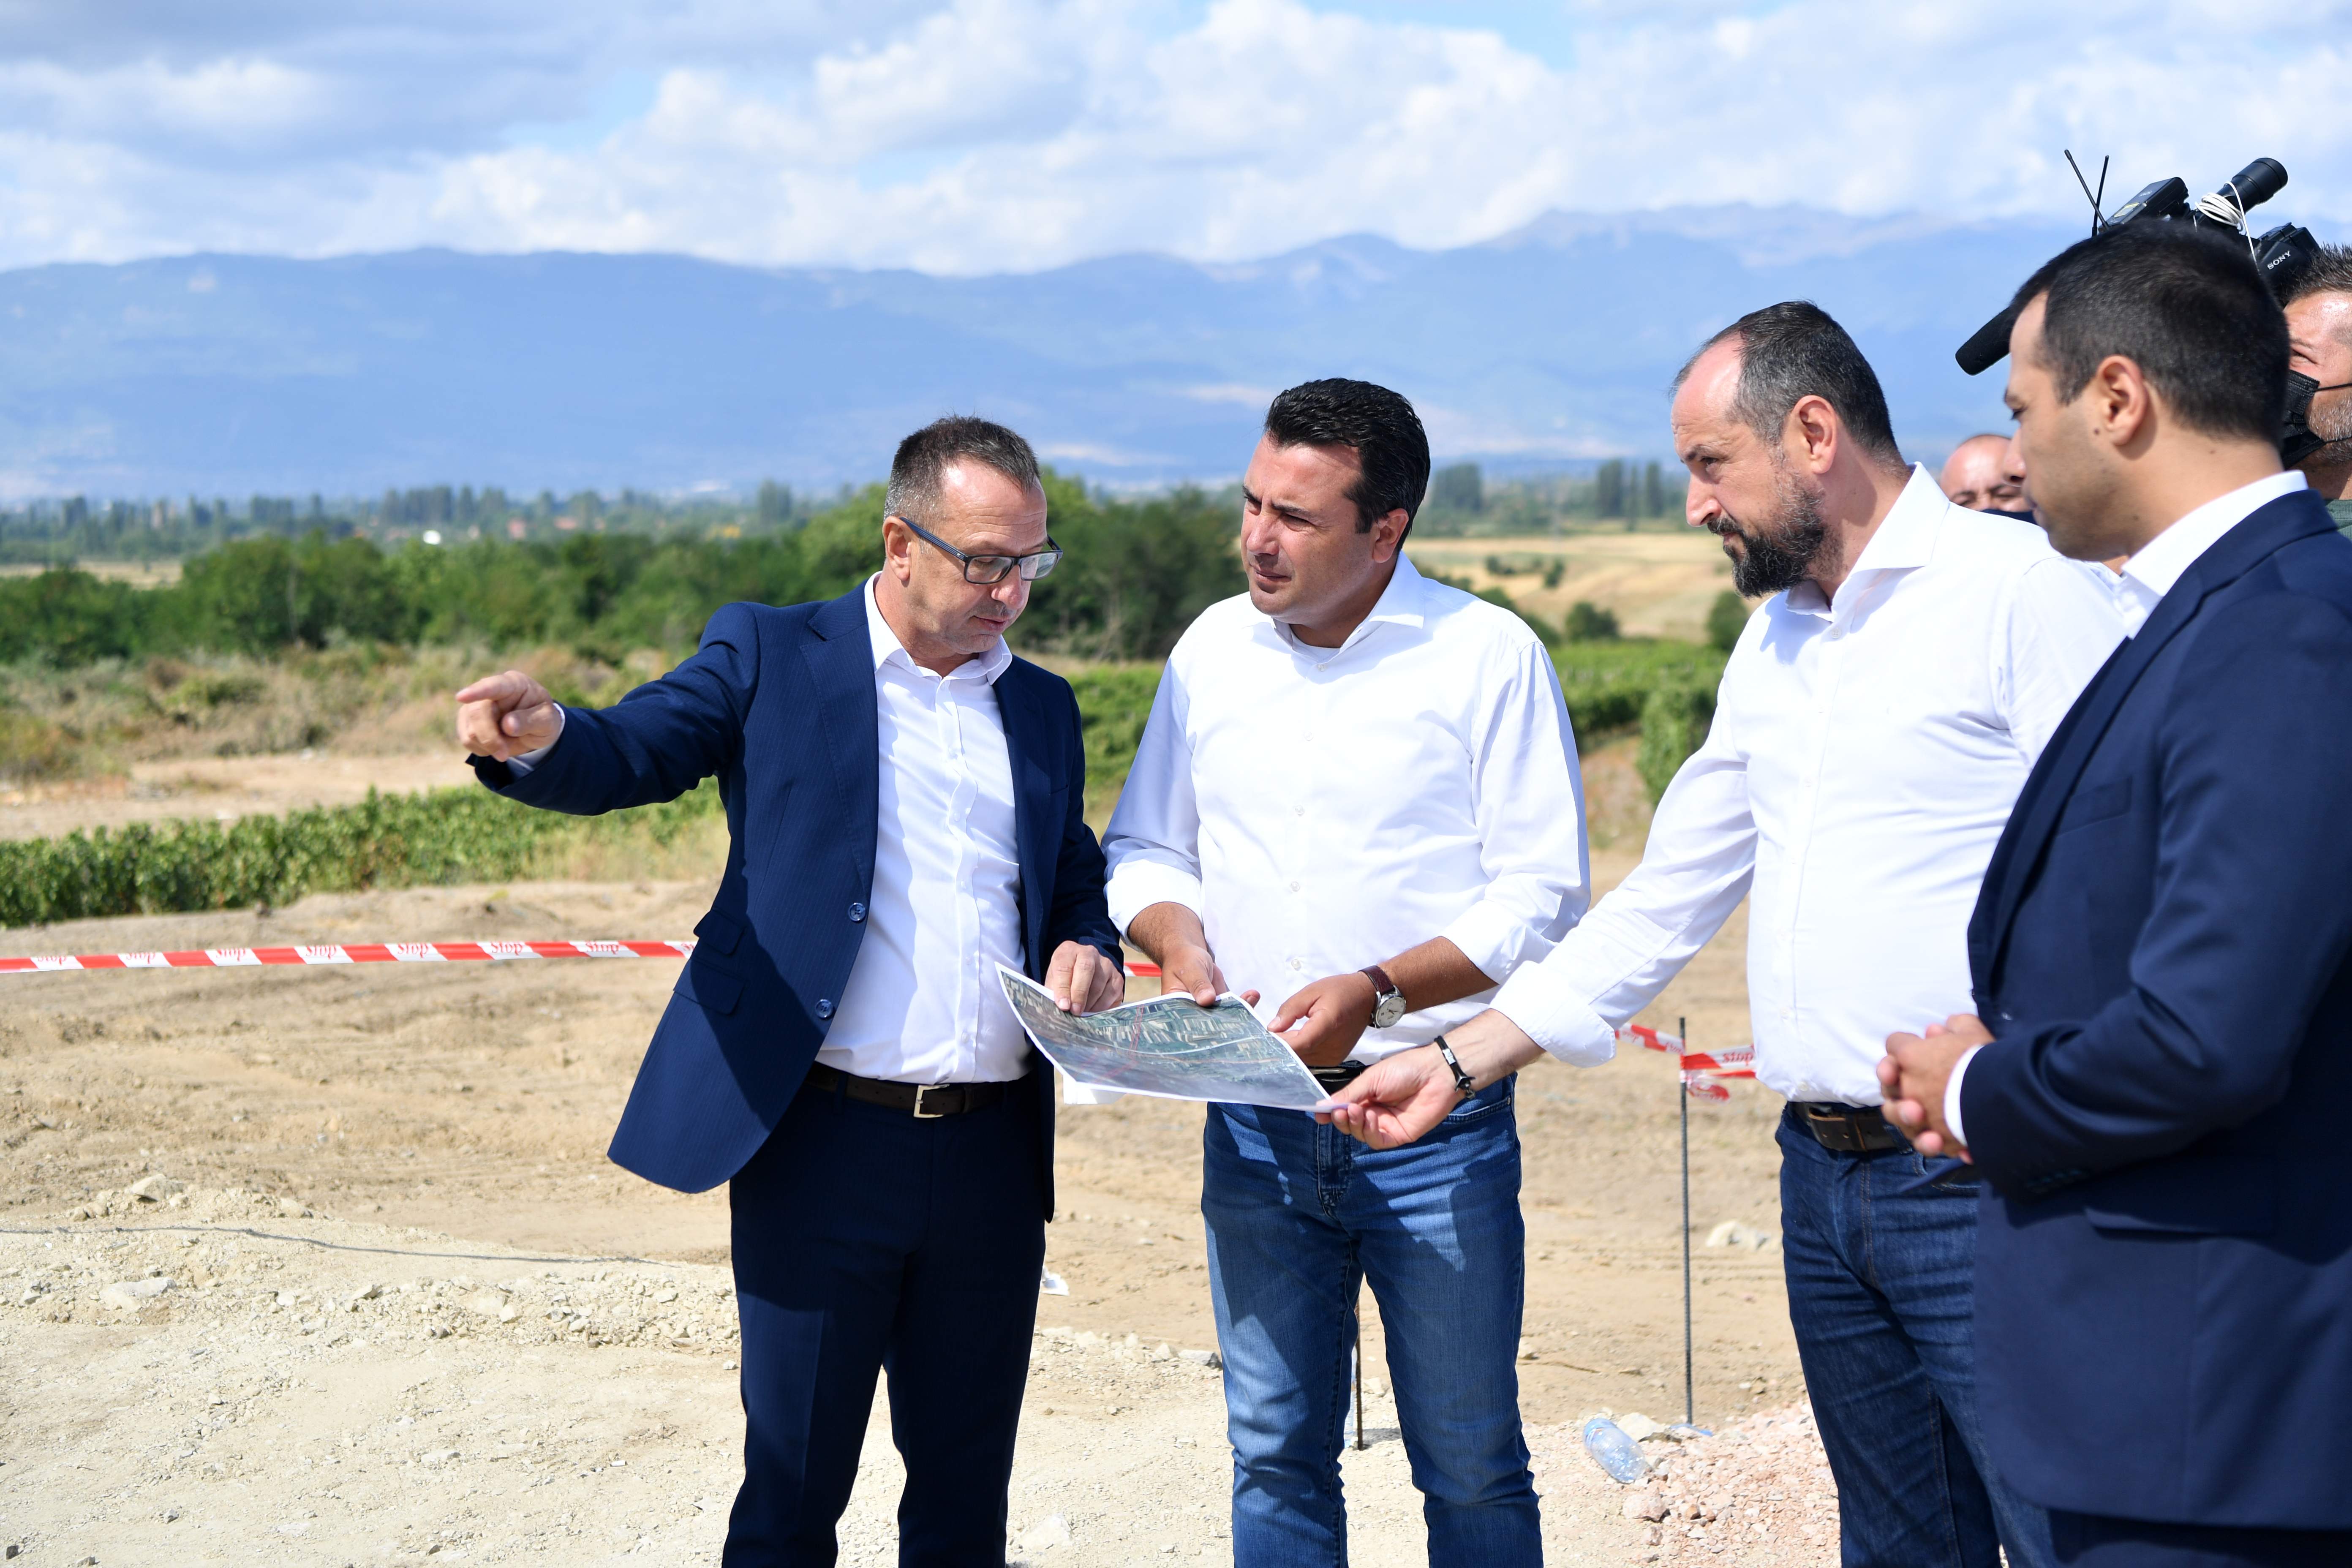 The realization of 400 kV interconnection Bitola – Elbasan has begun - The cornerstone for 400/110 kV SS Ohrid has been laid